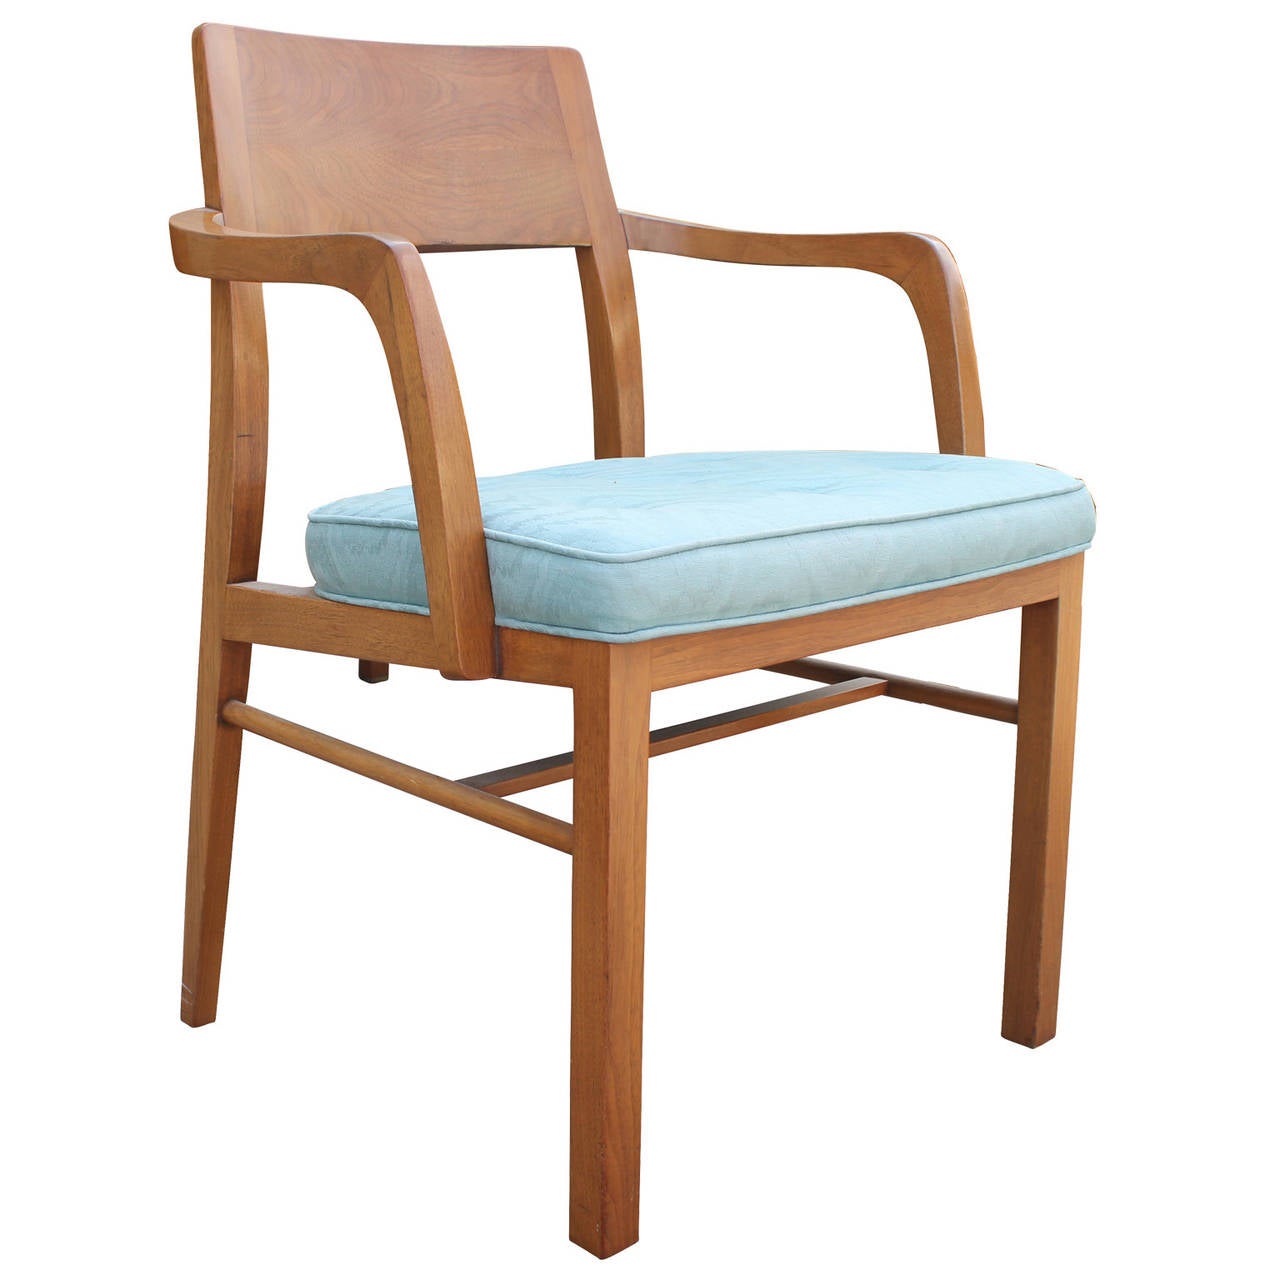 American Edward Wormley for Dunbar Set of Mid-Century Modern Dining Chairs